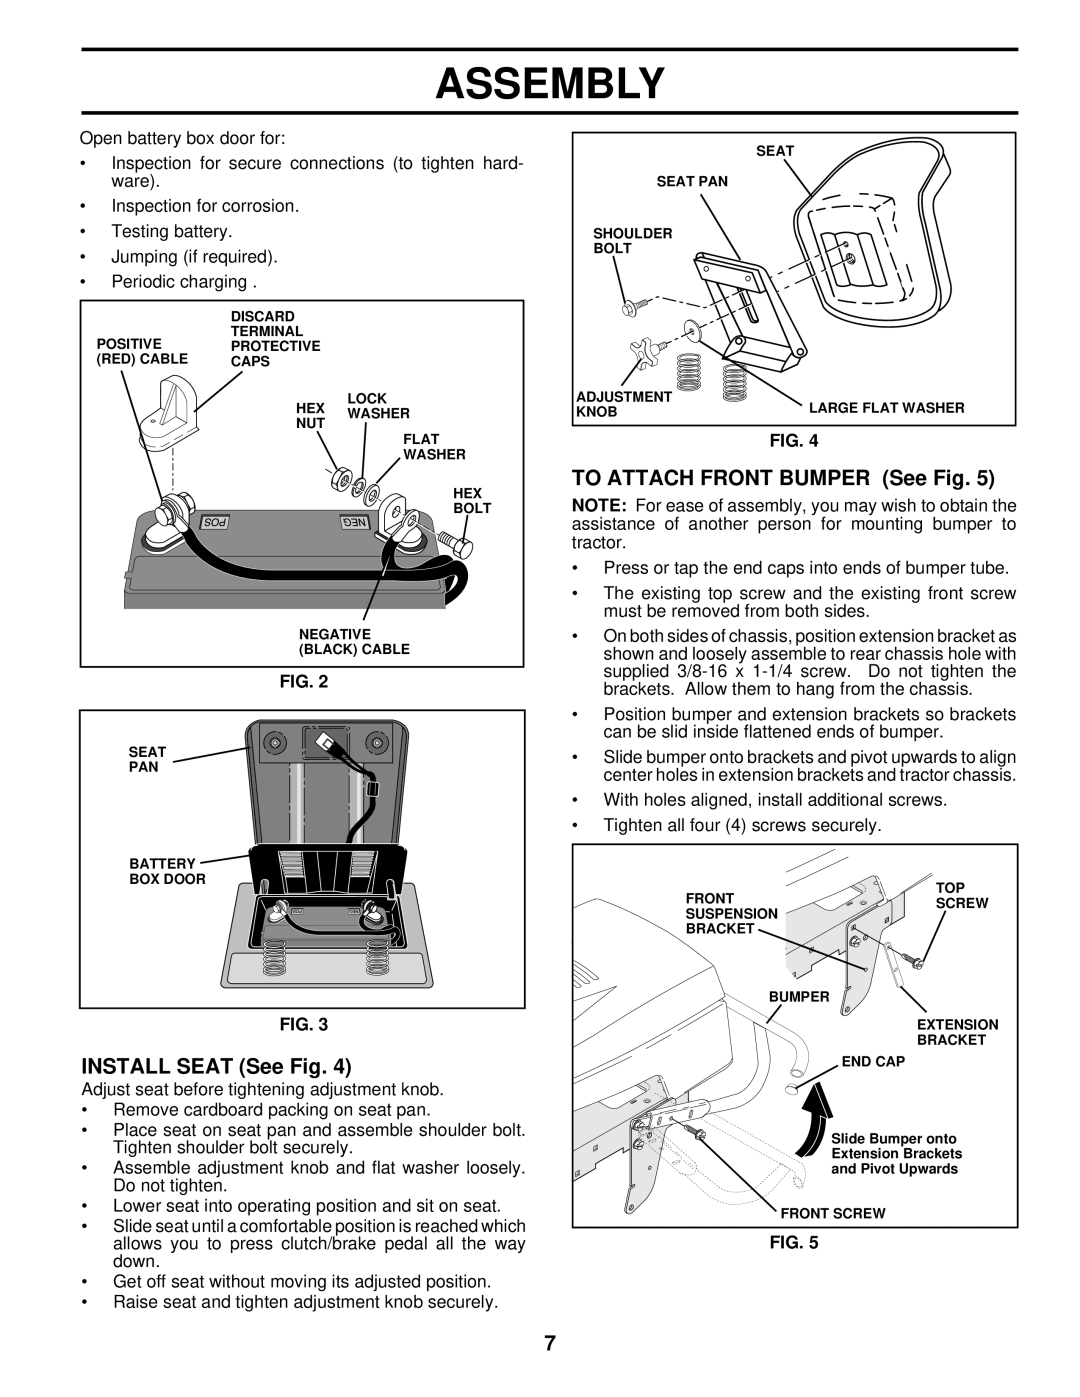 Husqvarna LTH130 owner manual Assembly, INSTALL SEAT See Fig, TO ATTACH FRONT BUMPER See Fig 